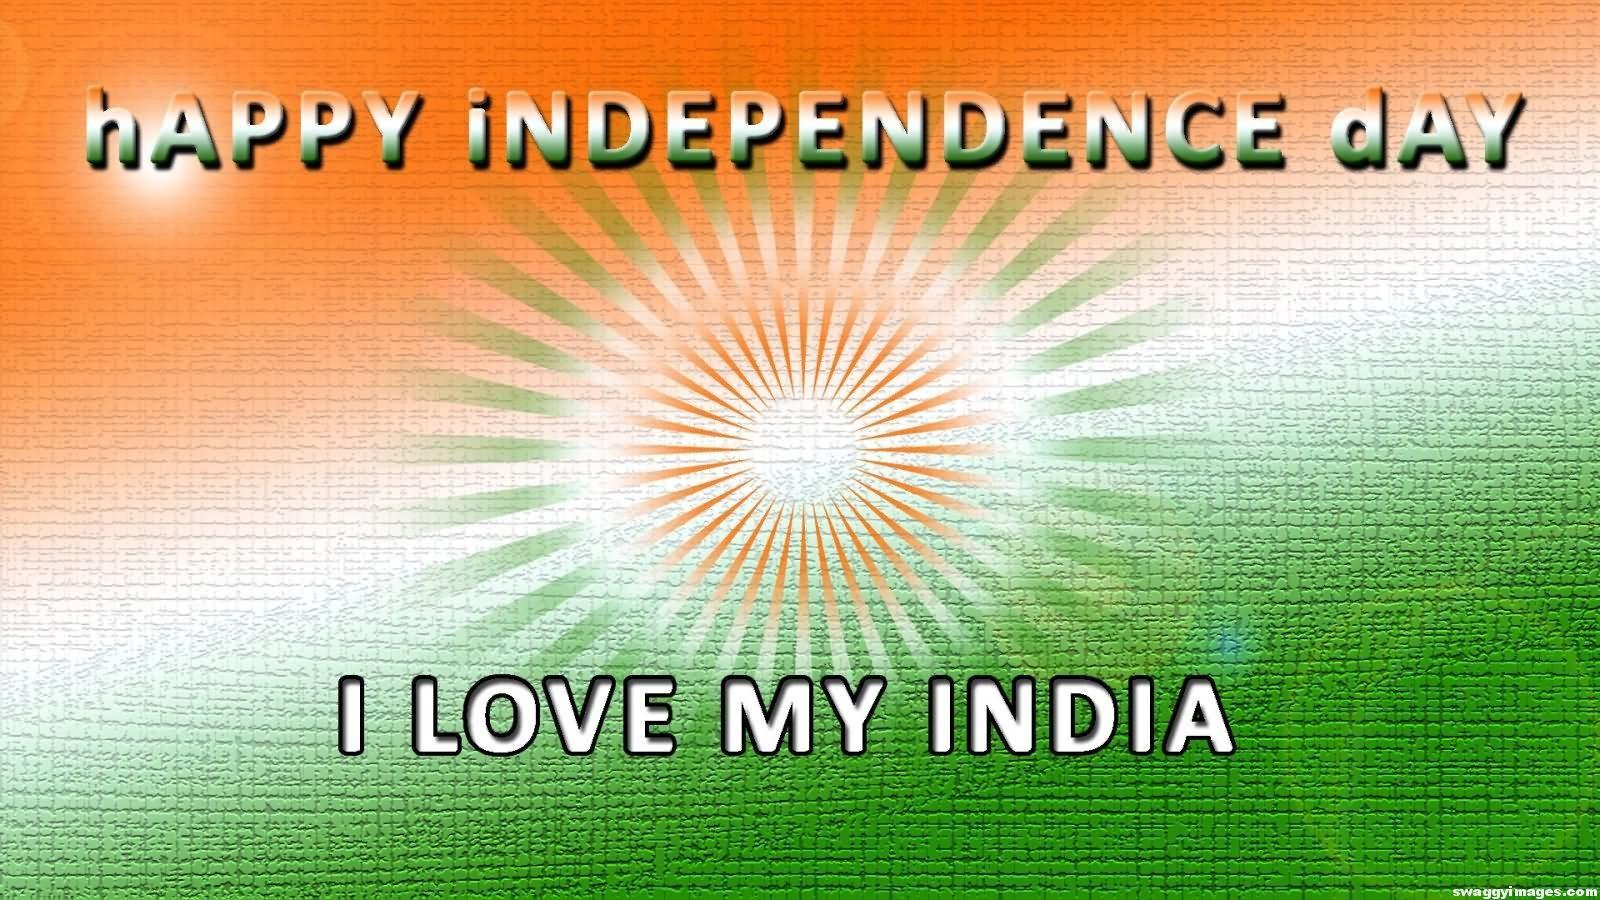 Independence Day Love Wallpaper HD India Swaggy Image